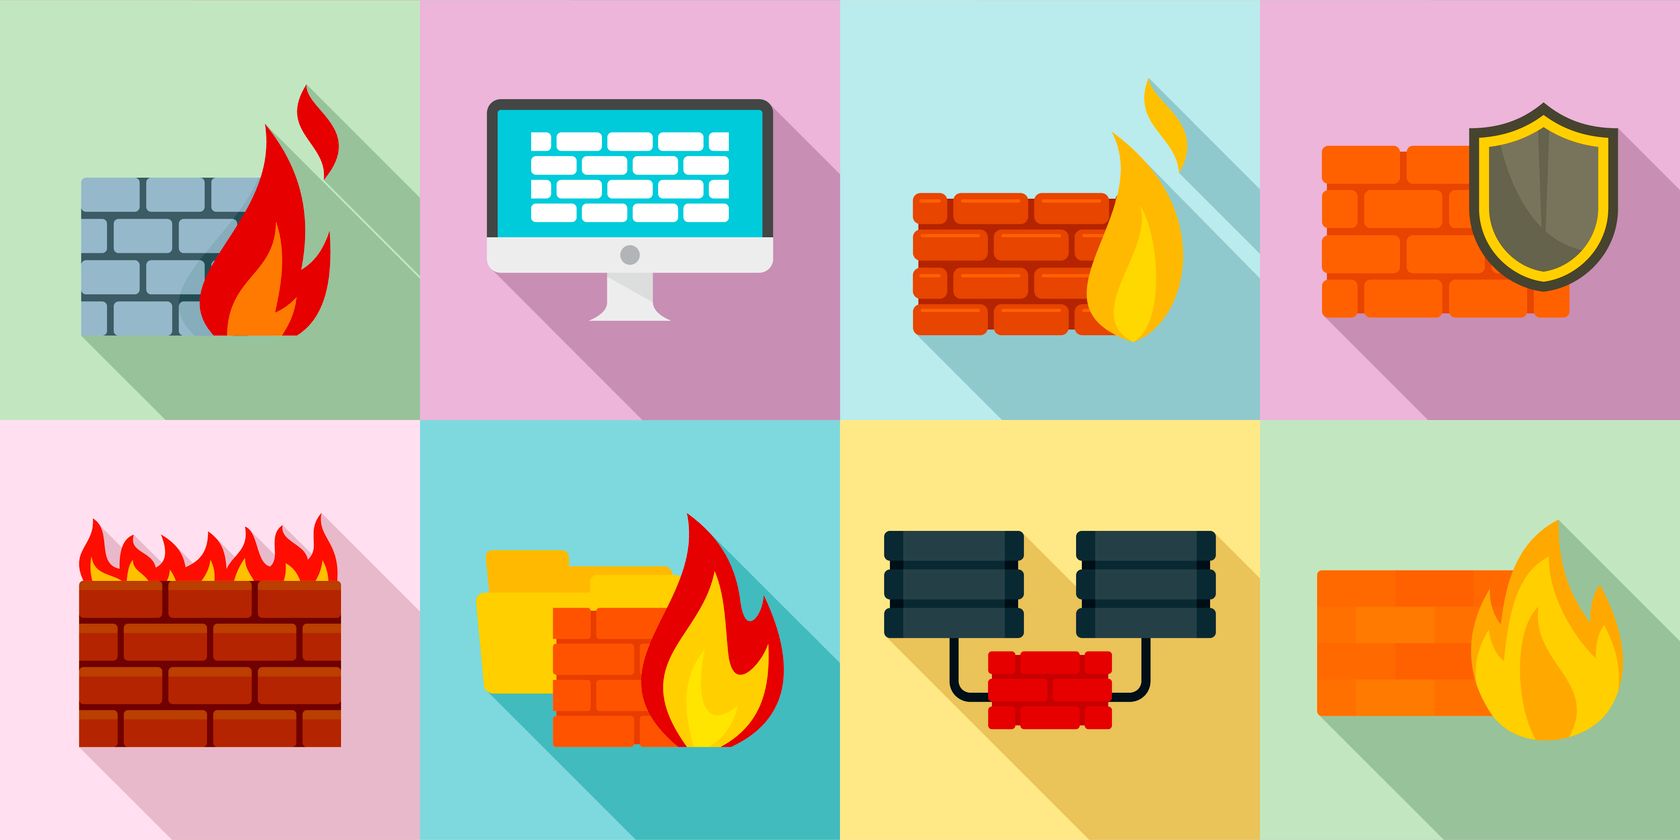 How Does A Firewall Work?